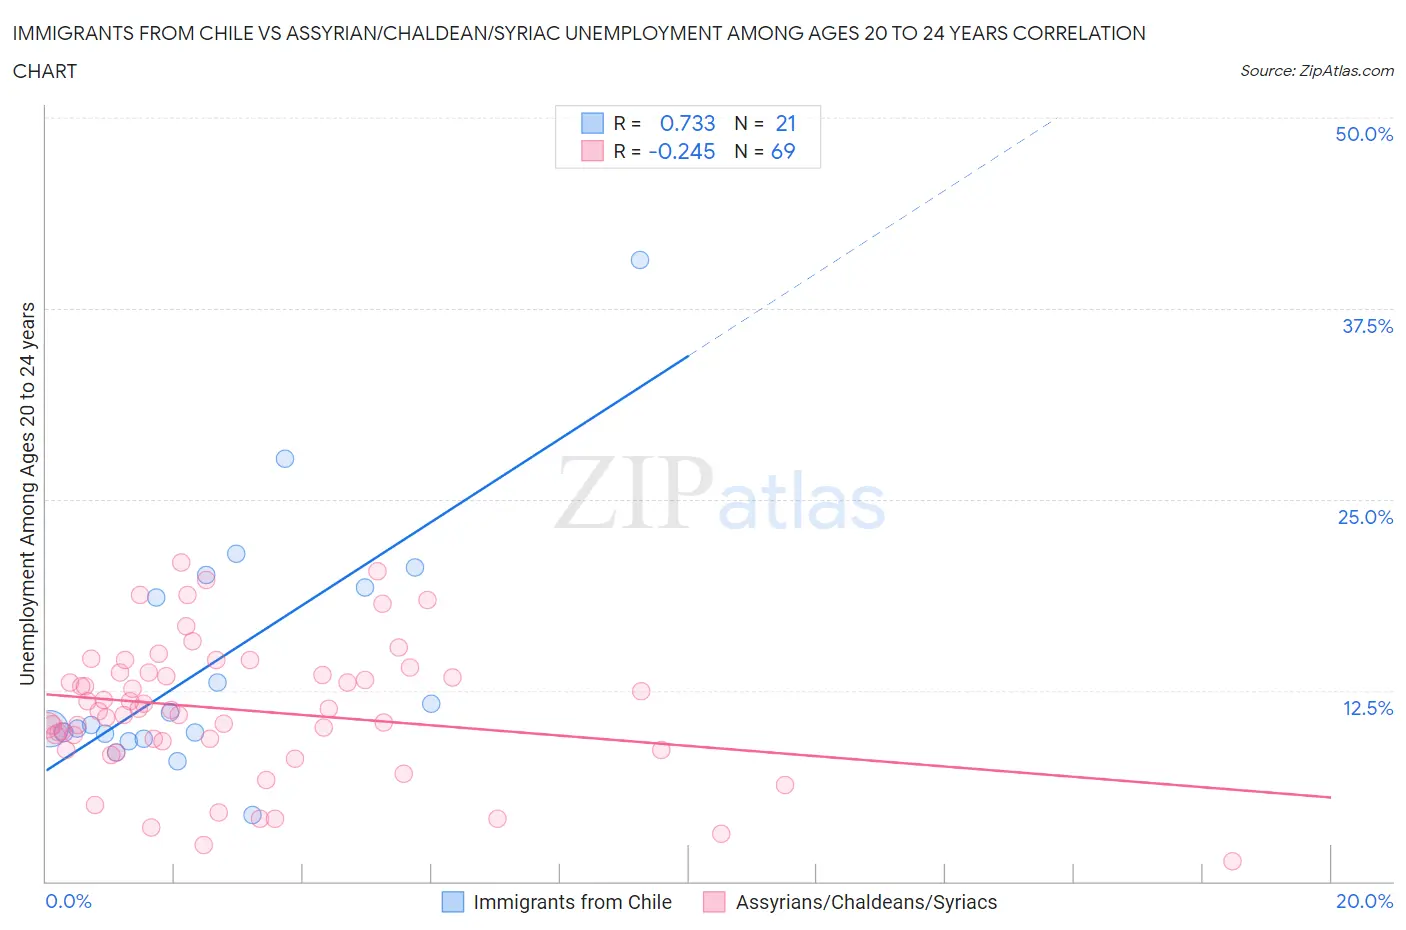 Immigrants from Chile vs Assyrian/Chaldean/Syriac Unemployment Among Ages 20 to 24 years